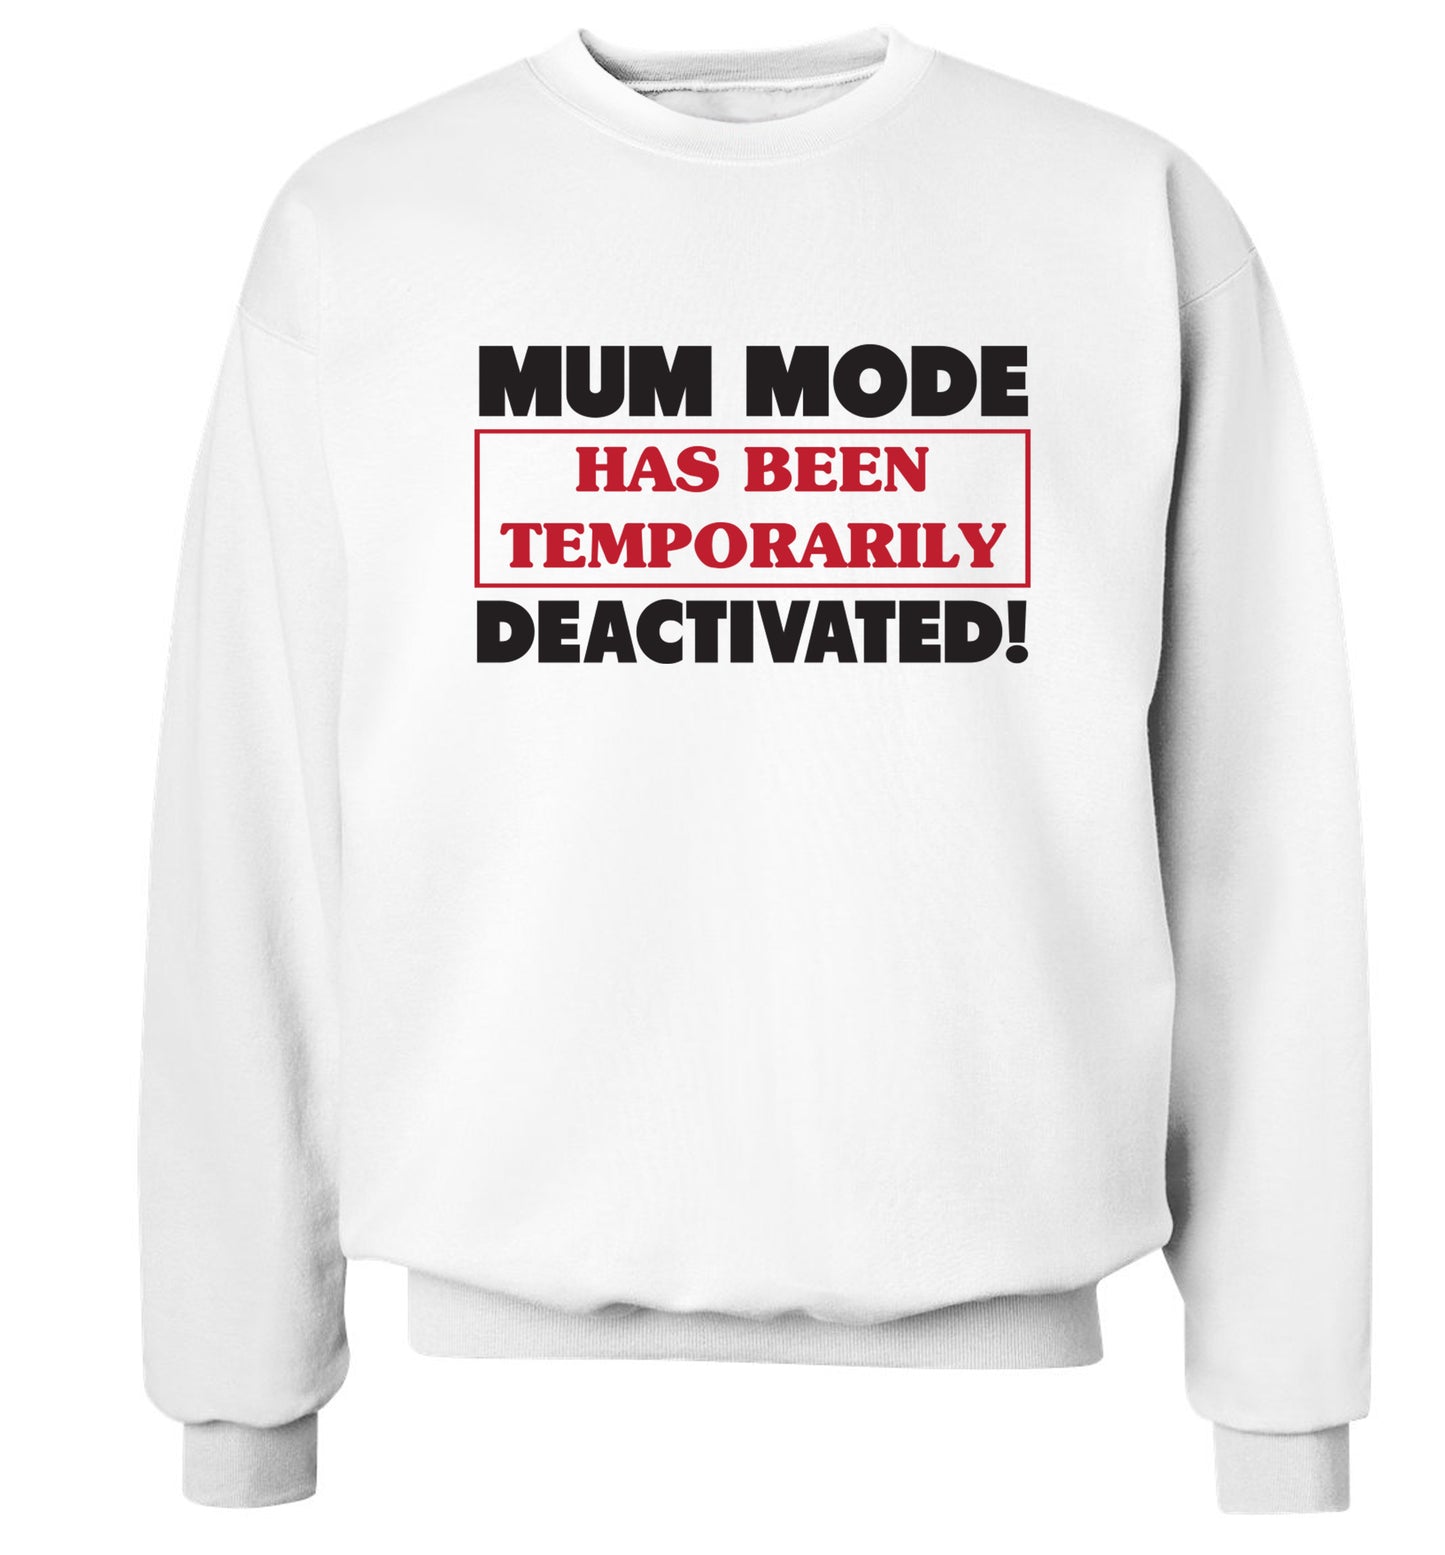 Mum mode has been temporarily deactivated! Adult's unisex white Sweater 2XL